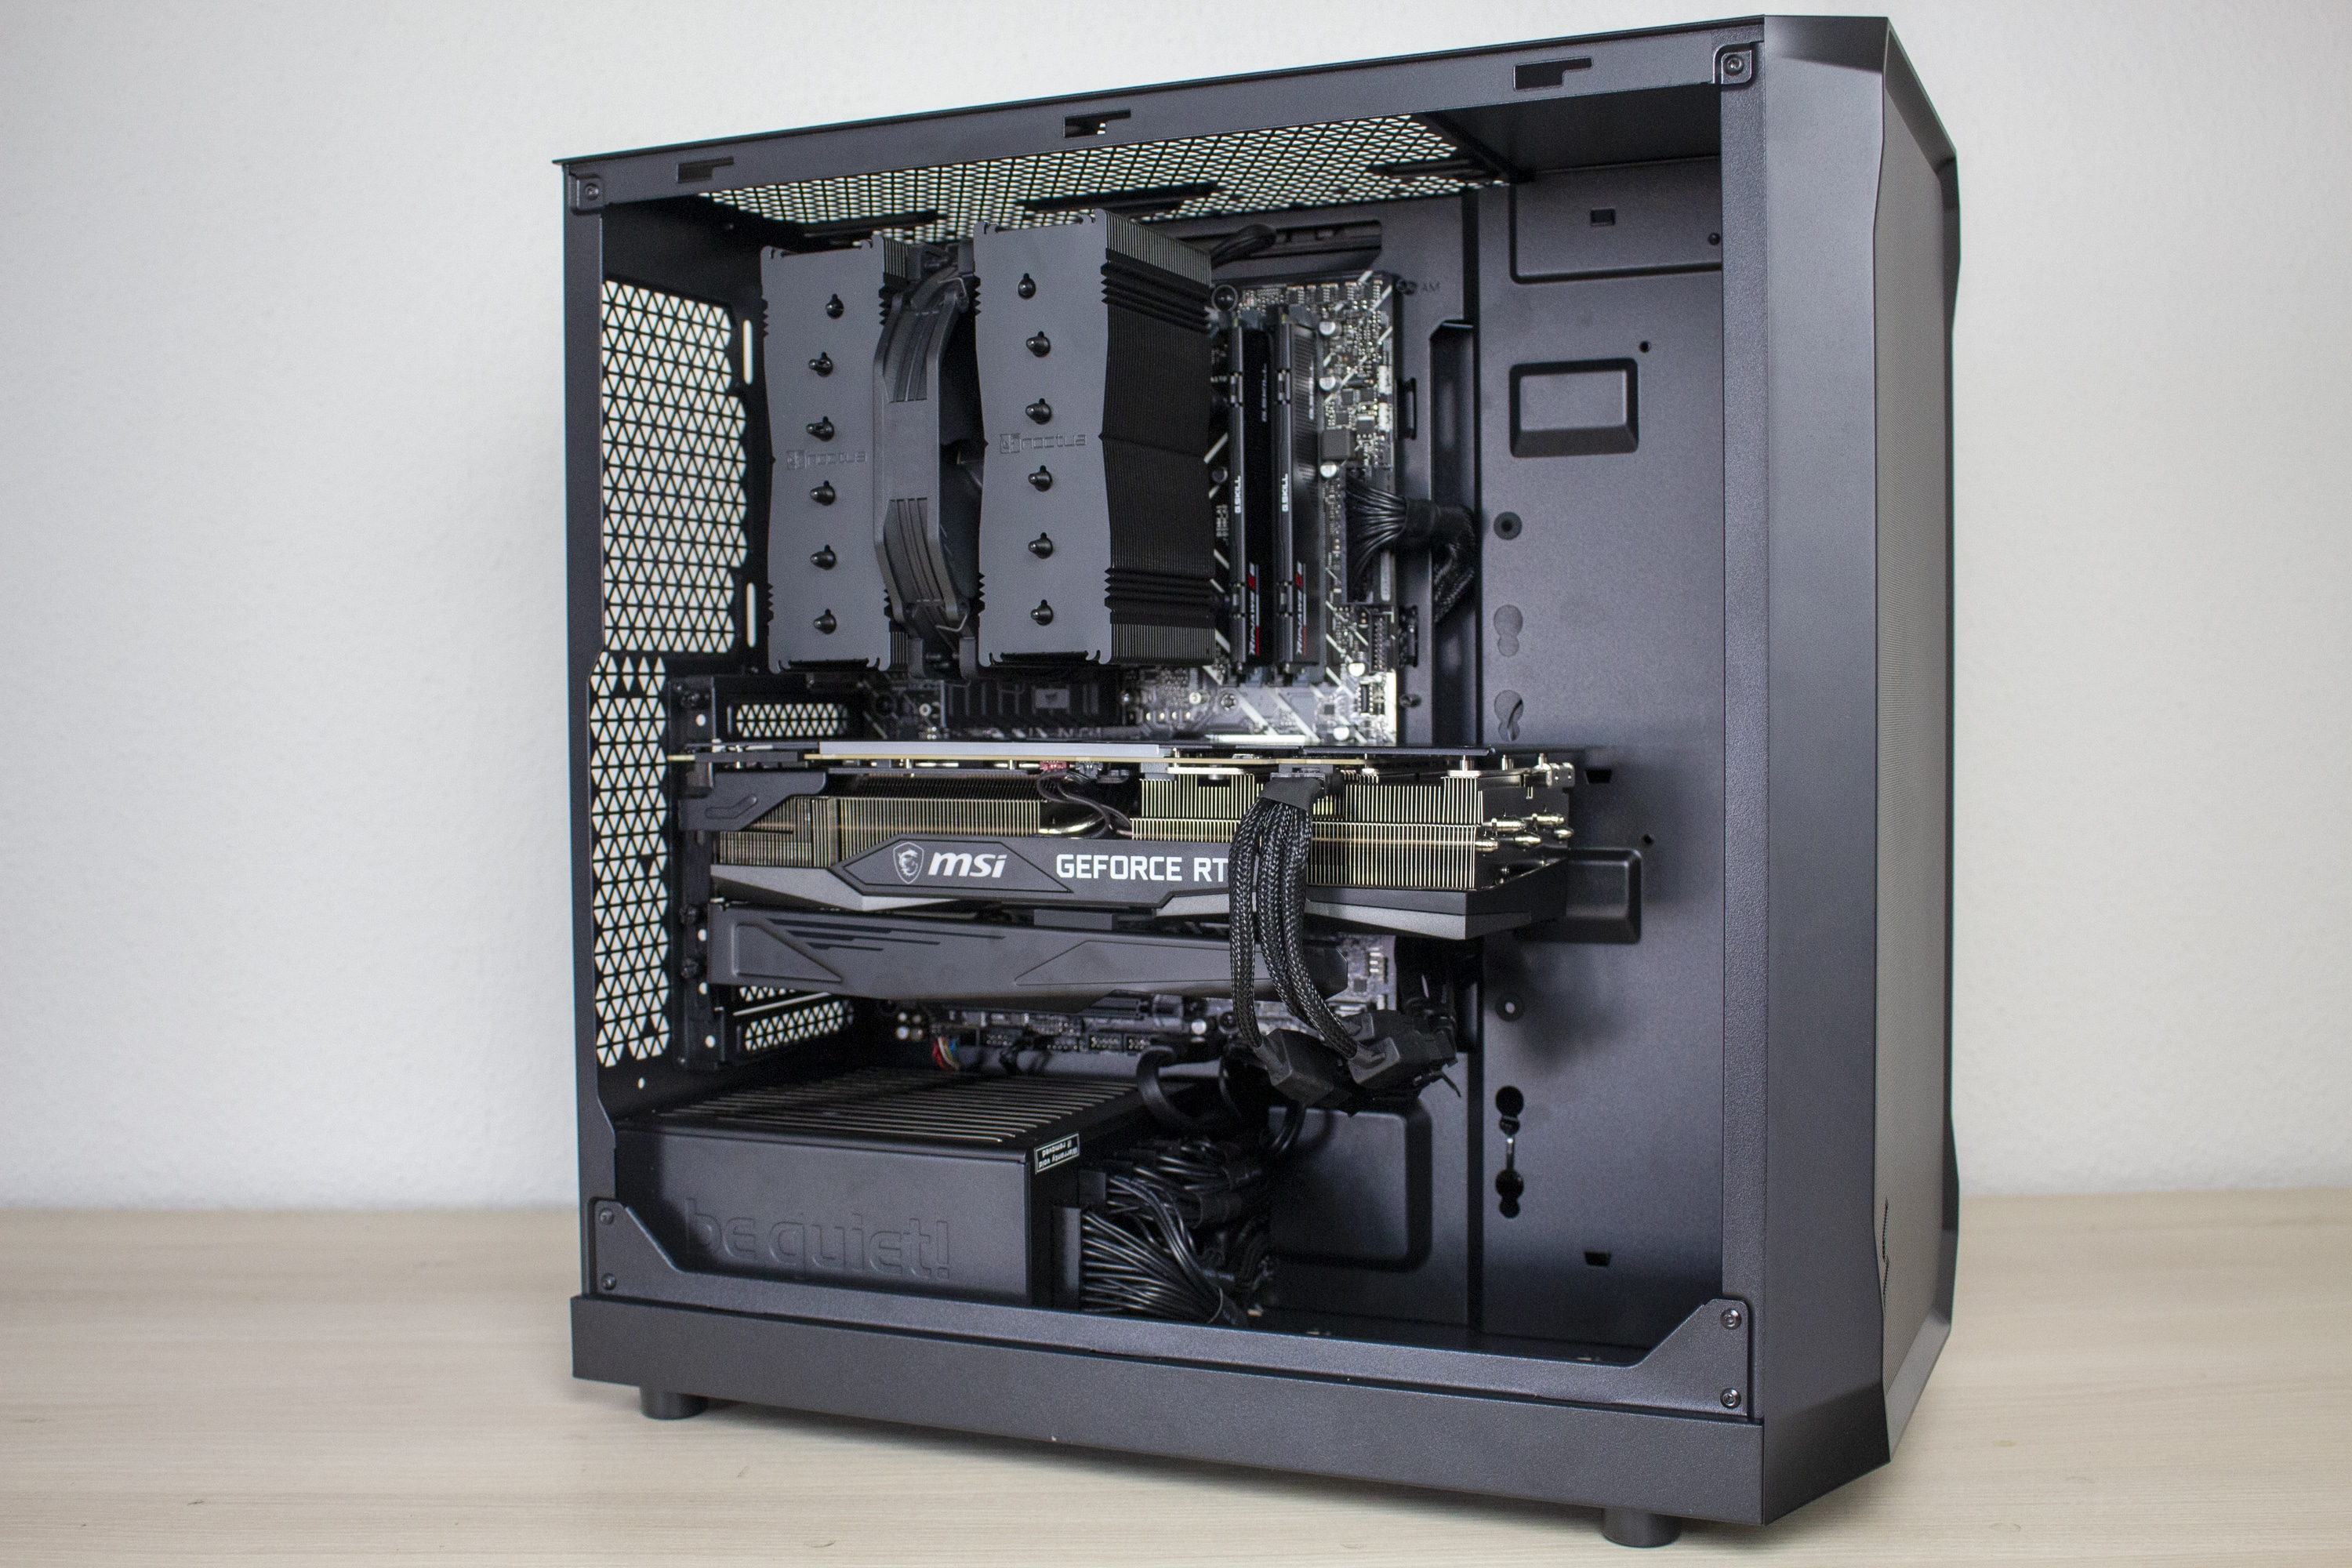 Fractal Design Focus 2 chassis review